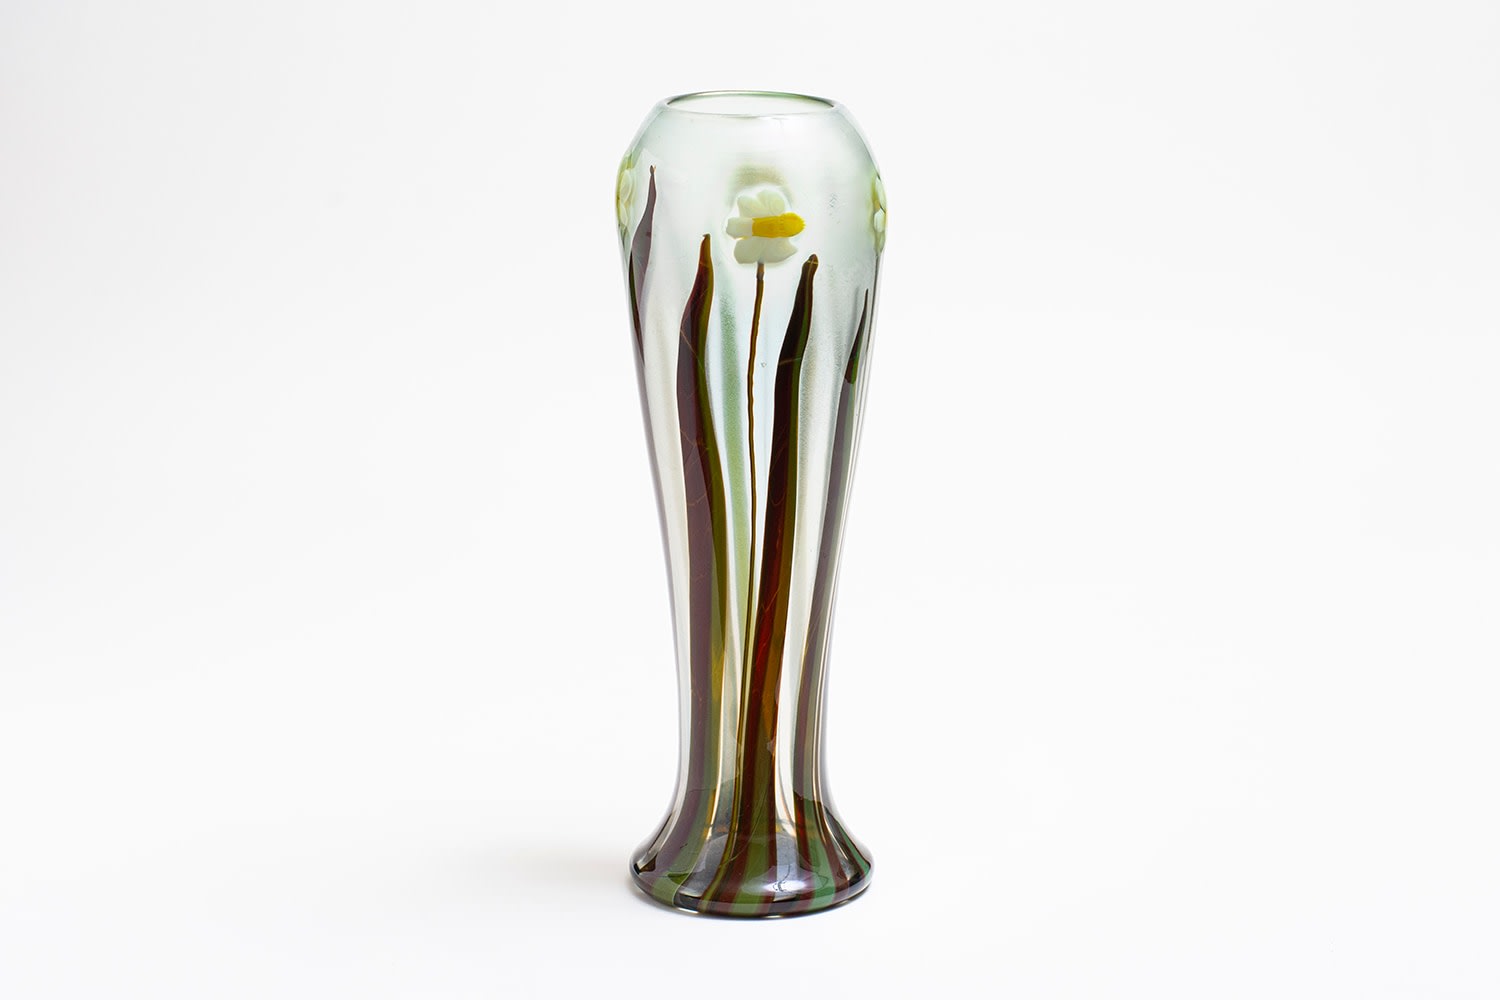 a tall and thin tiffany glass vase depicting white and yellow narcissus or nasturtium blossoms on tall thin stems with spiky green/brown leaves